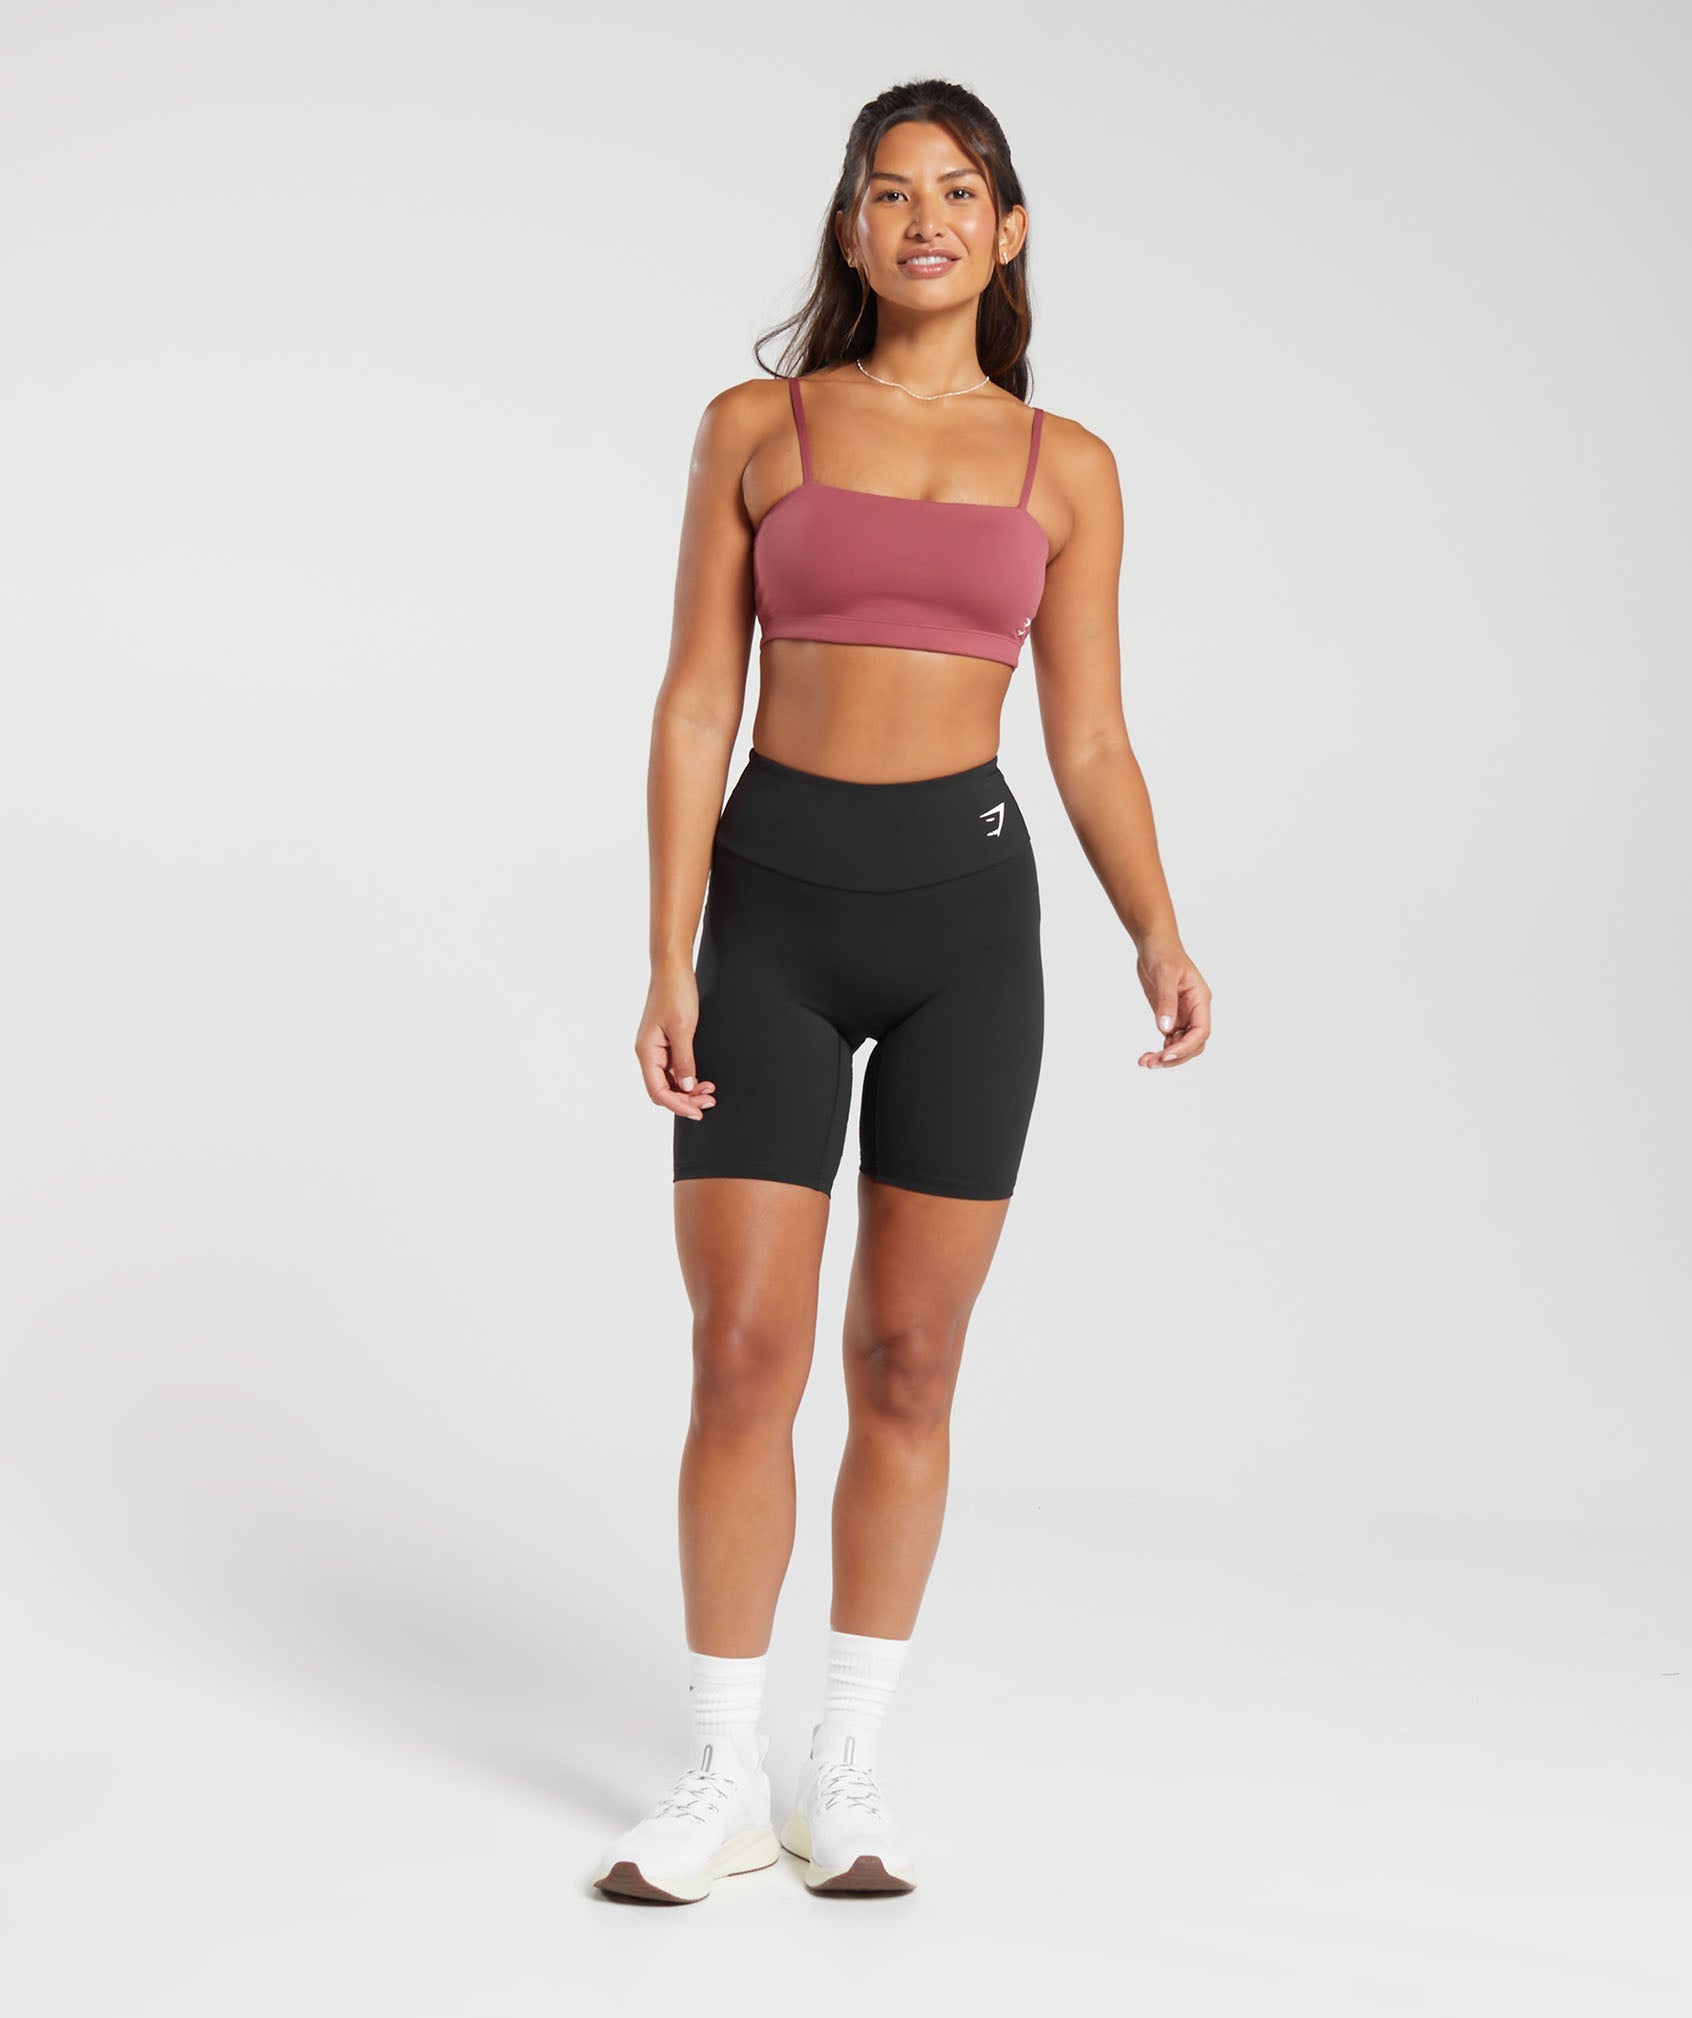 Bandeau Sports Bra in Soft Berry - view 7